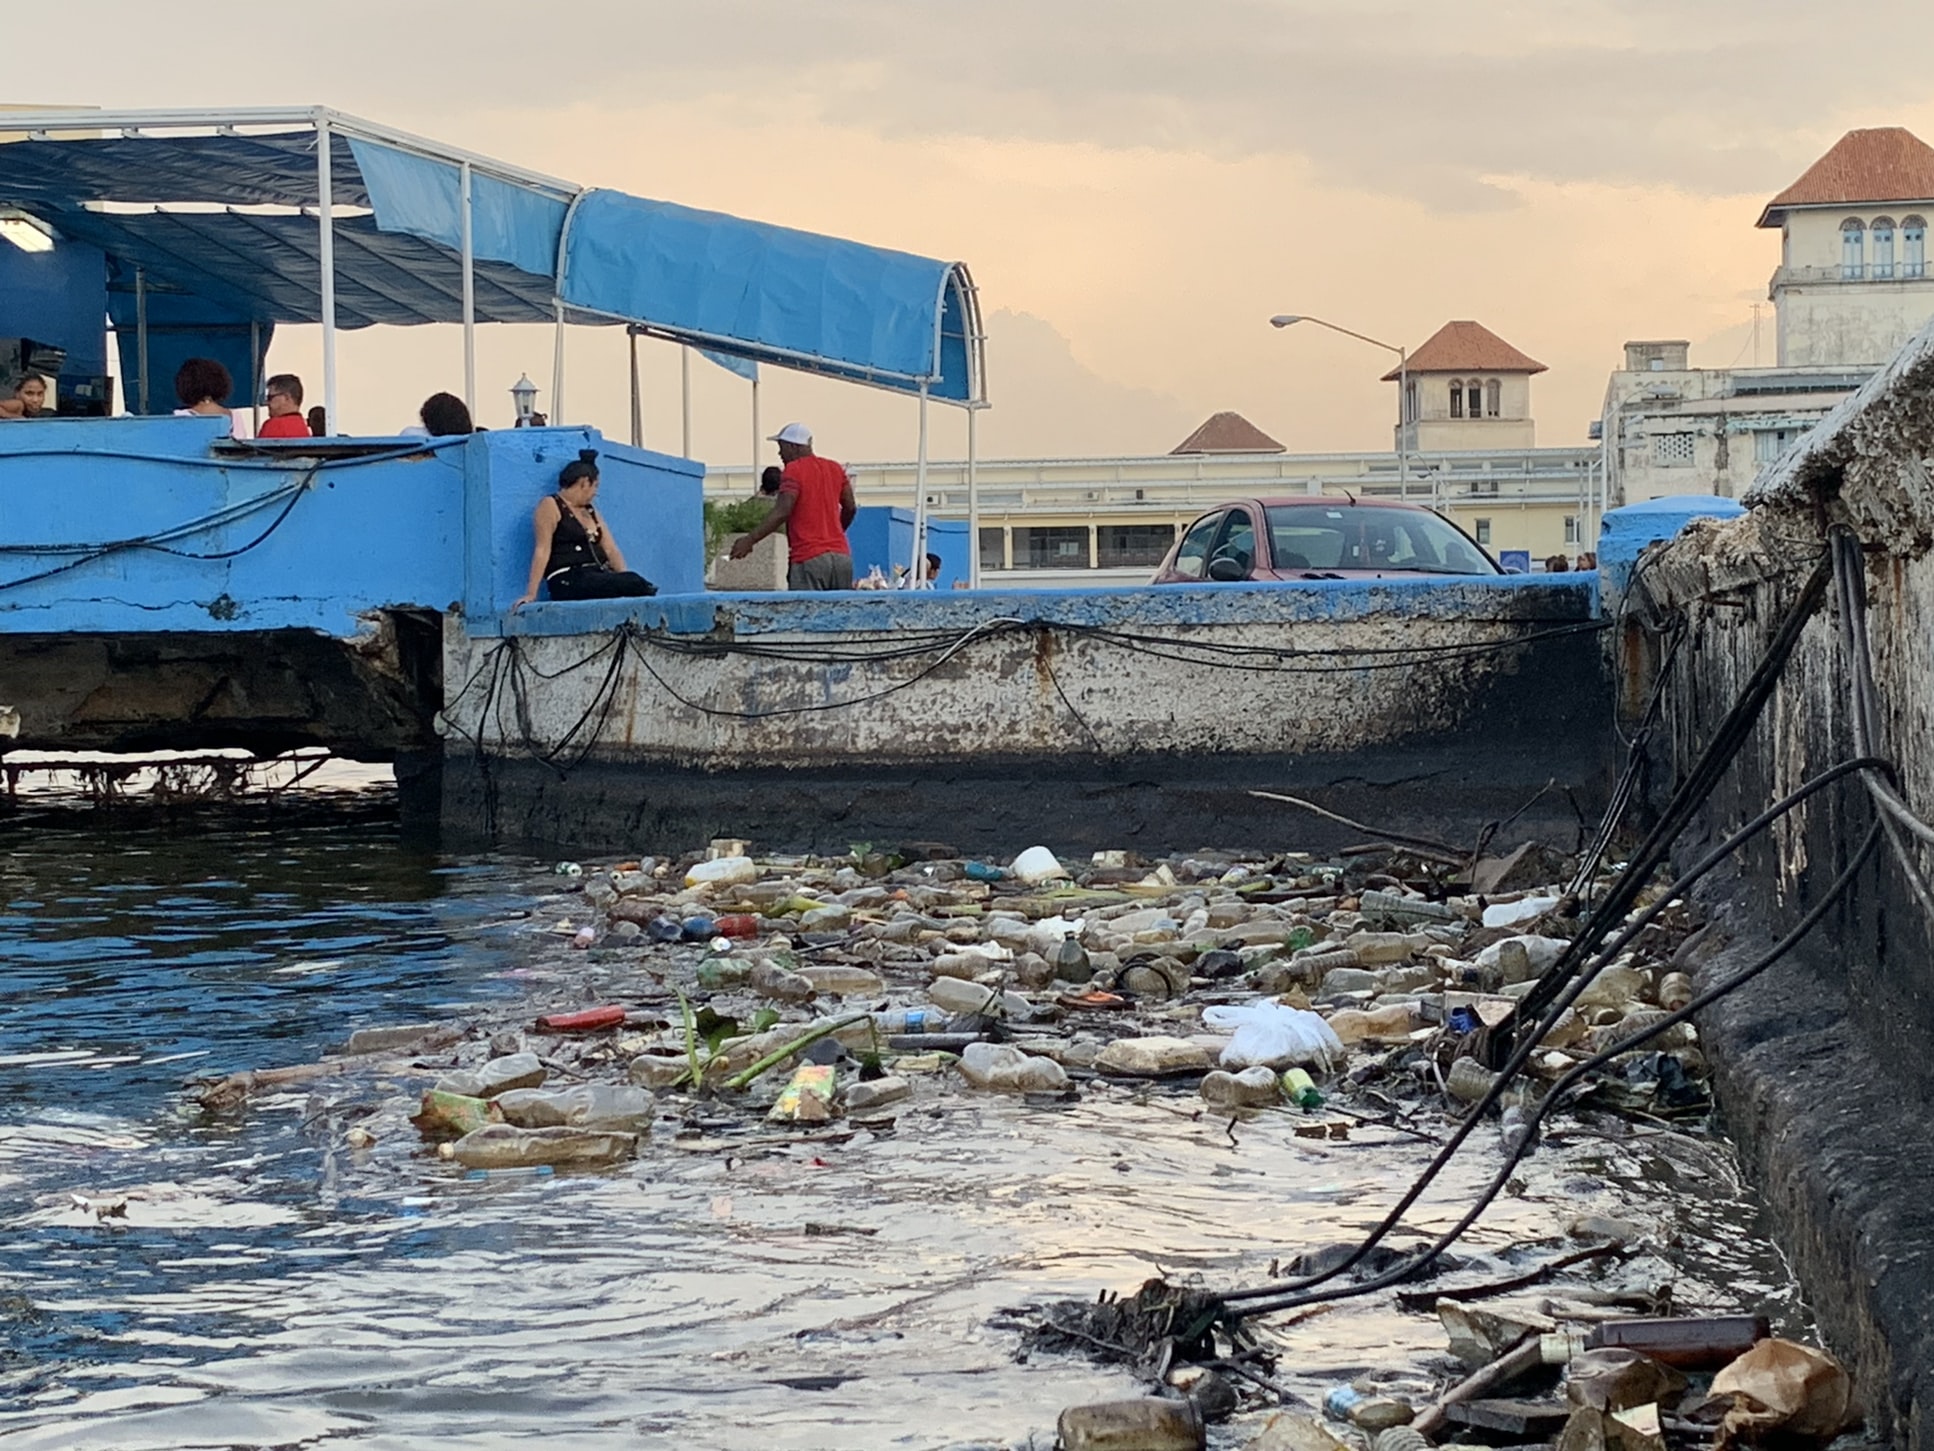 More than 300,000 tons of plastic waste in the Caribbean are not collected every year as a result of the fact that a good part of the region's households throw plastic waste into waterways or land, according to World Bank data.